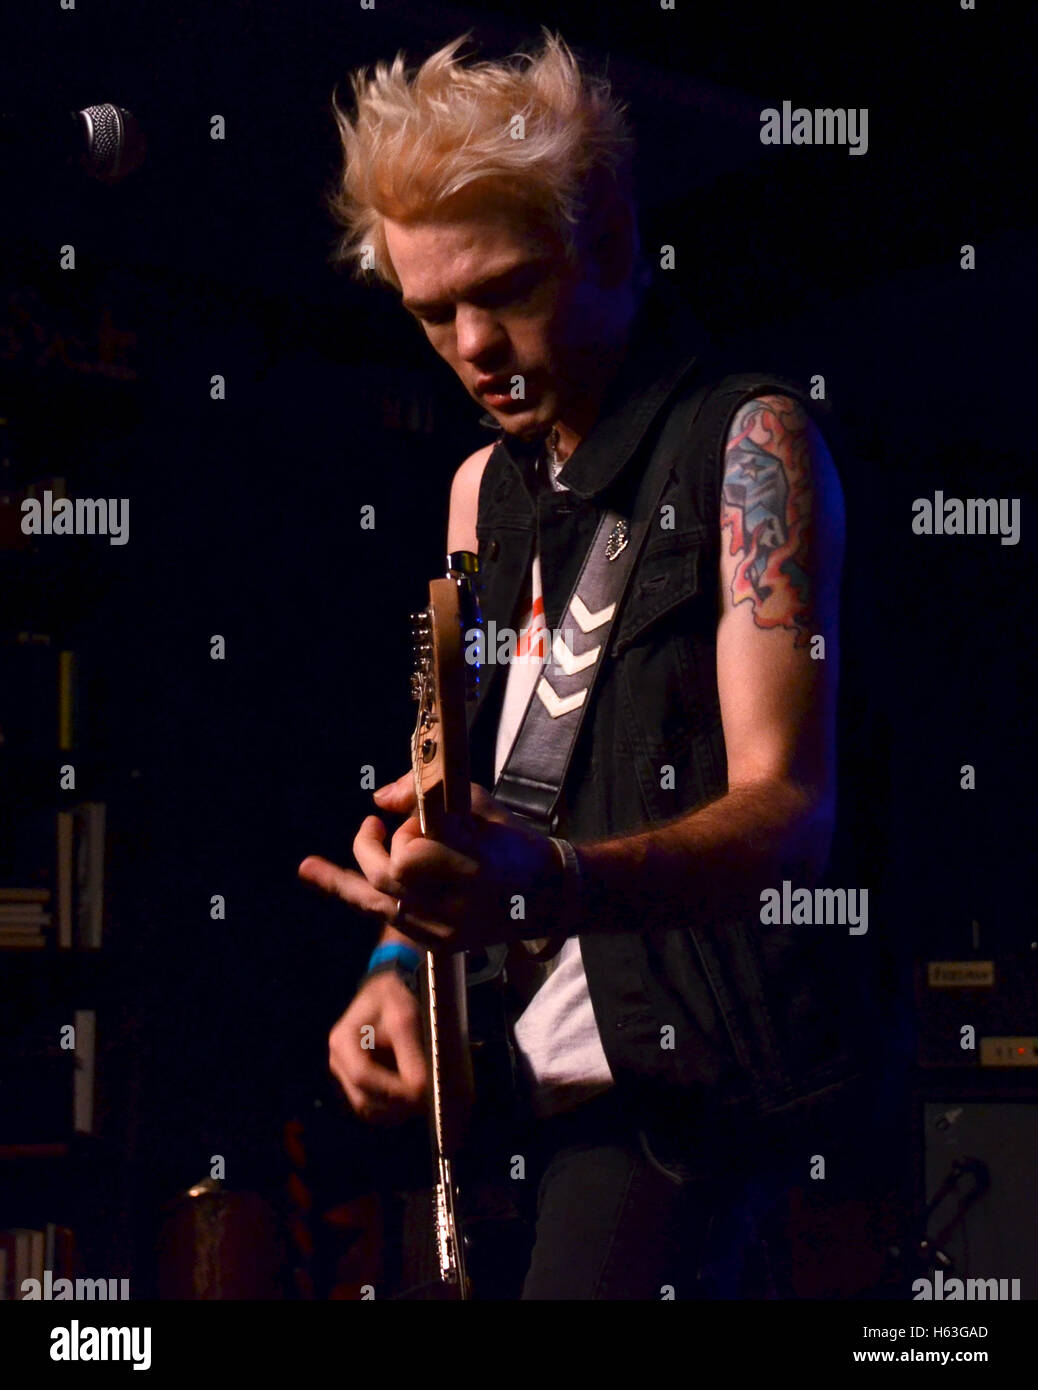 A picture of Deryck Whibley